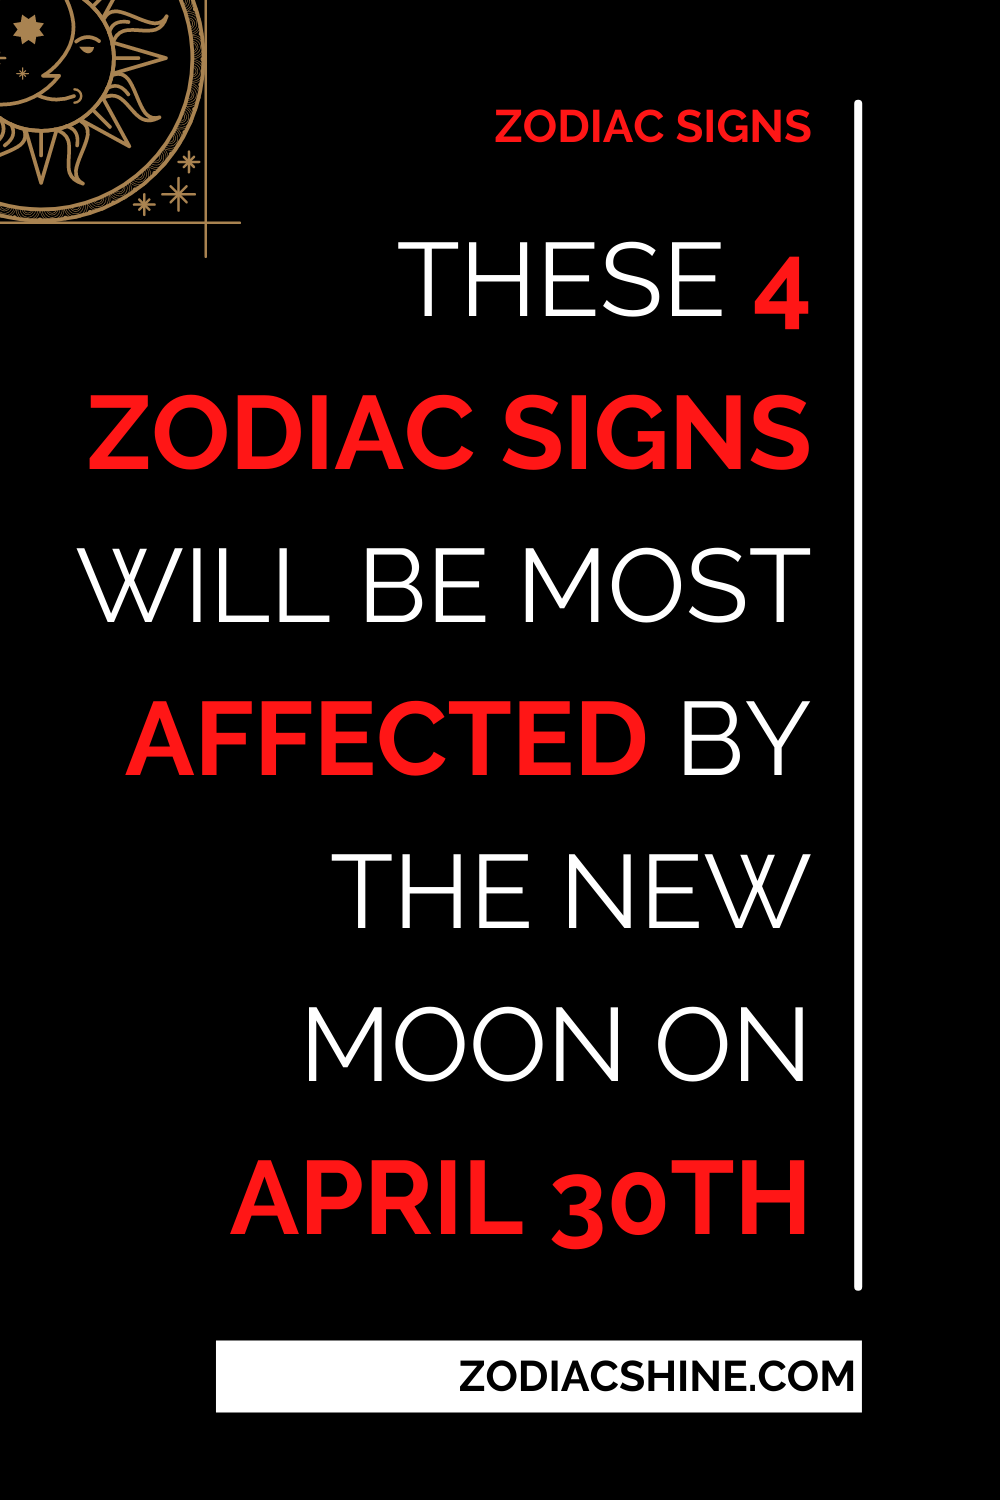 These 4 Zodiac Signs Will Be Most Affected By The New Moon On April 30th